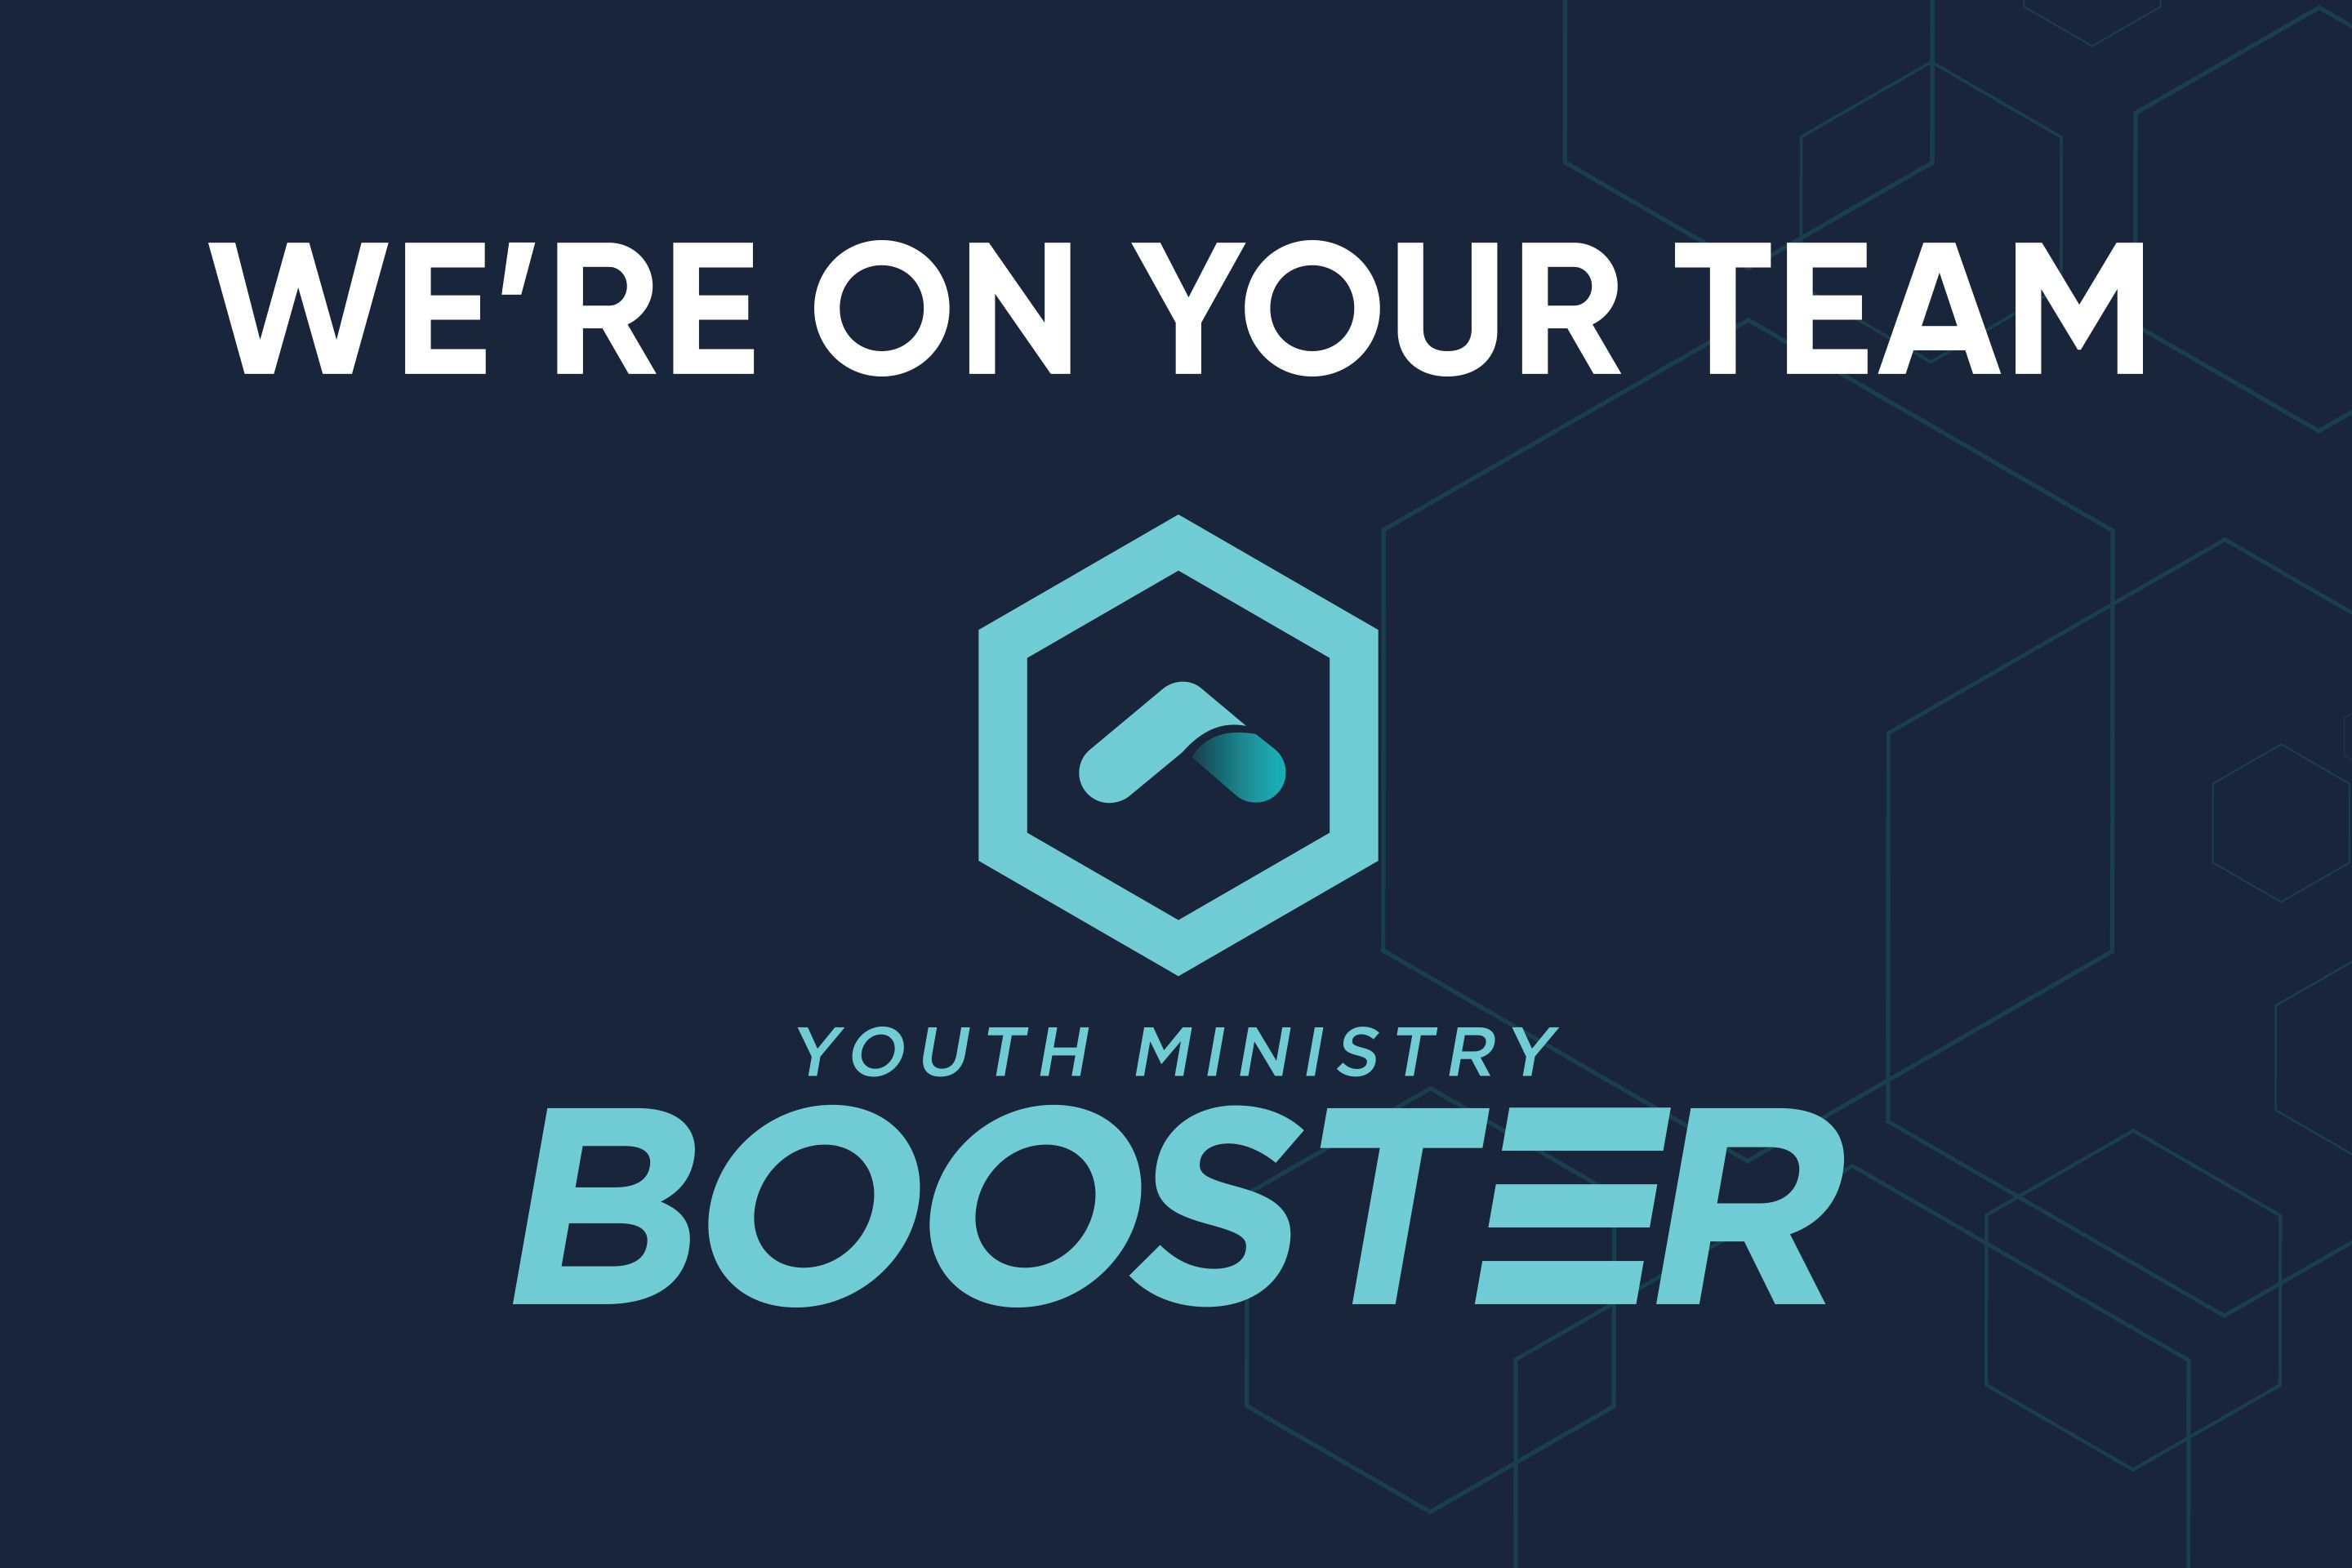 Youth Ministry Booster